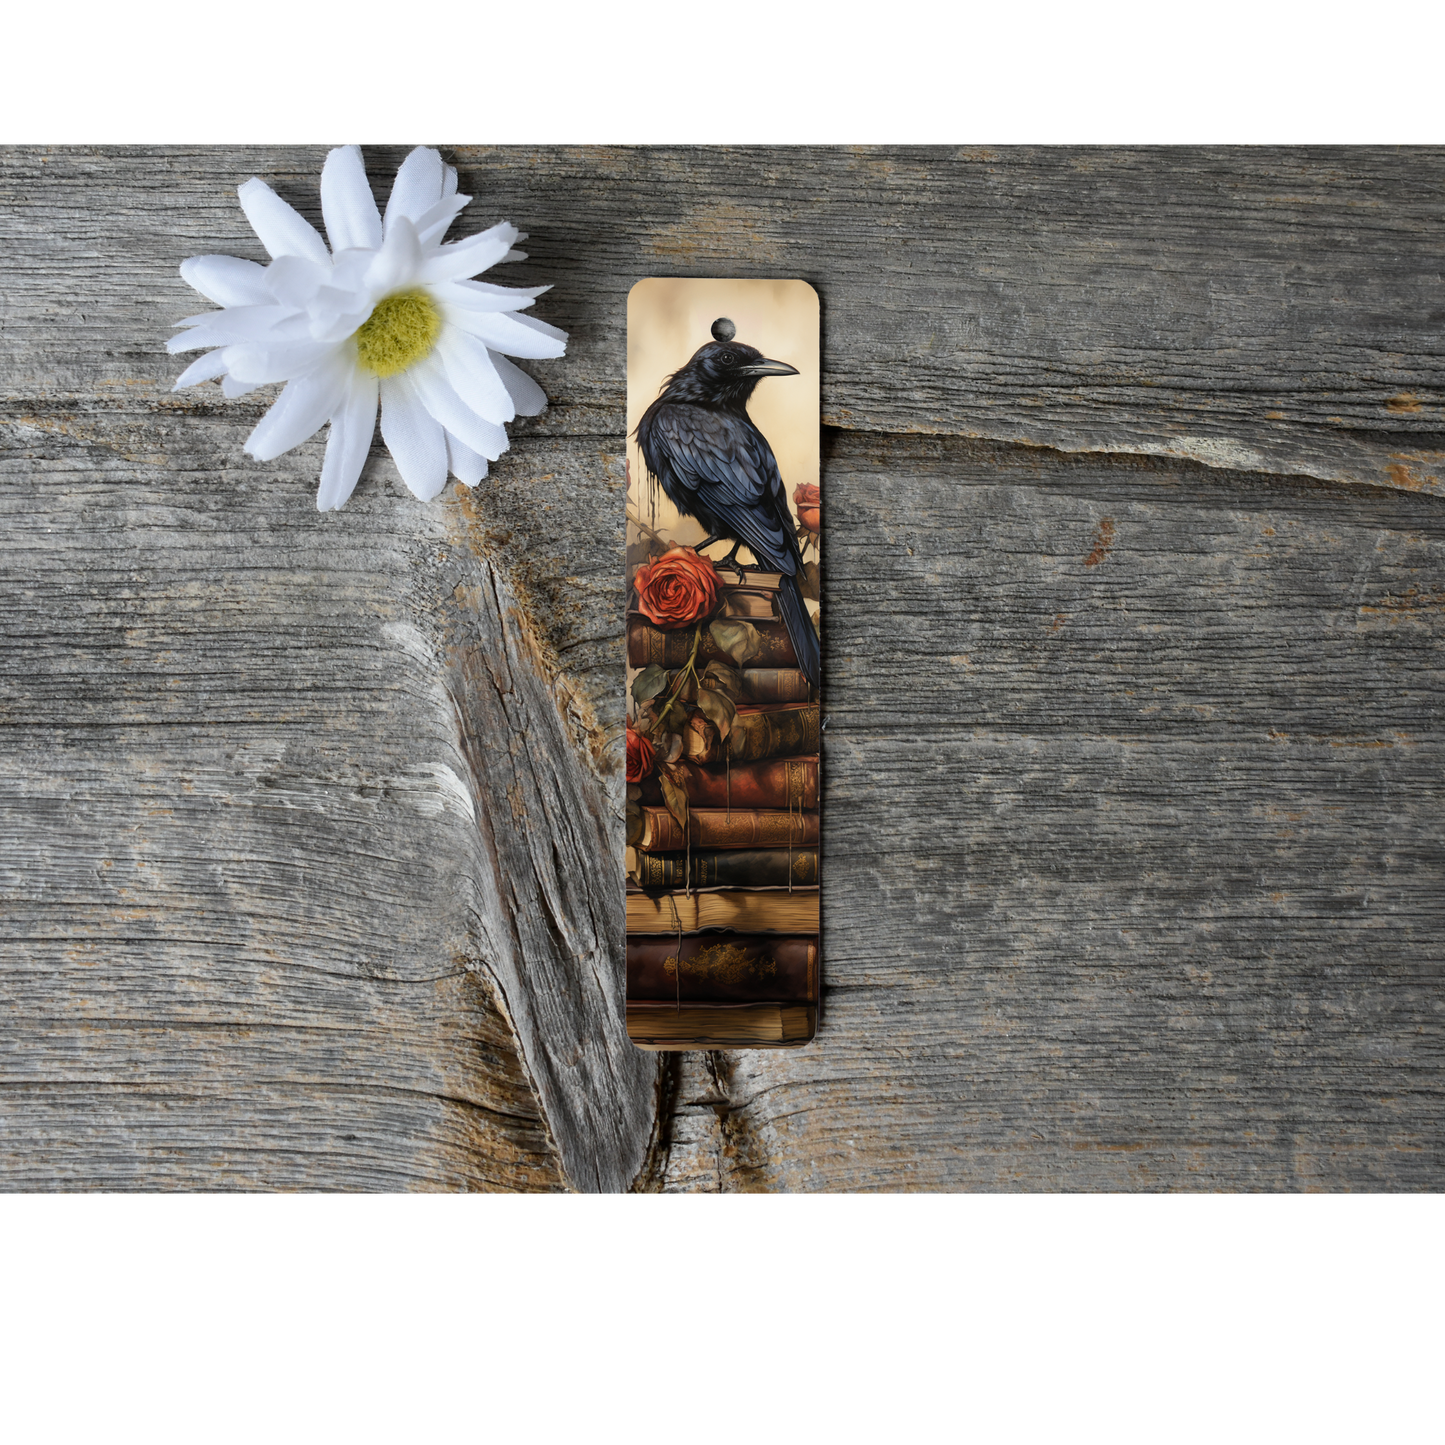 Bird on Books Aluminium Bookmark with Tassel - Stylish Metal Page Marker for Books and Journals